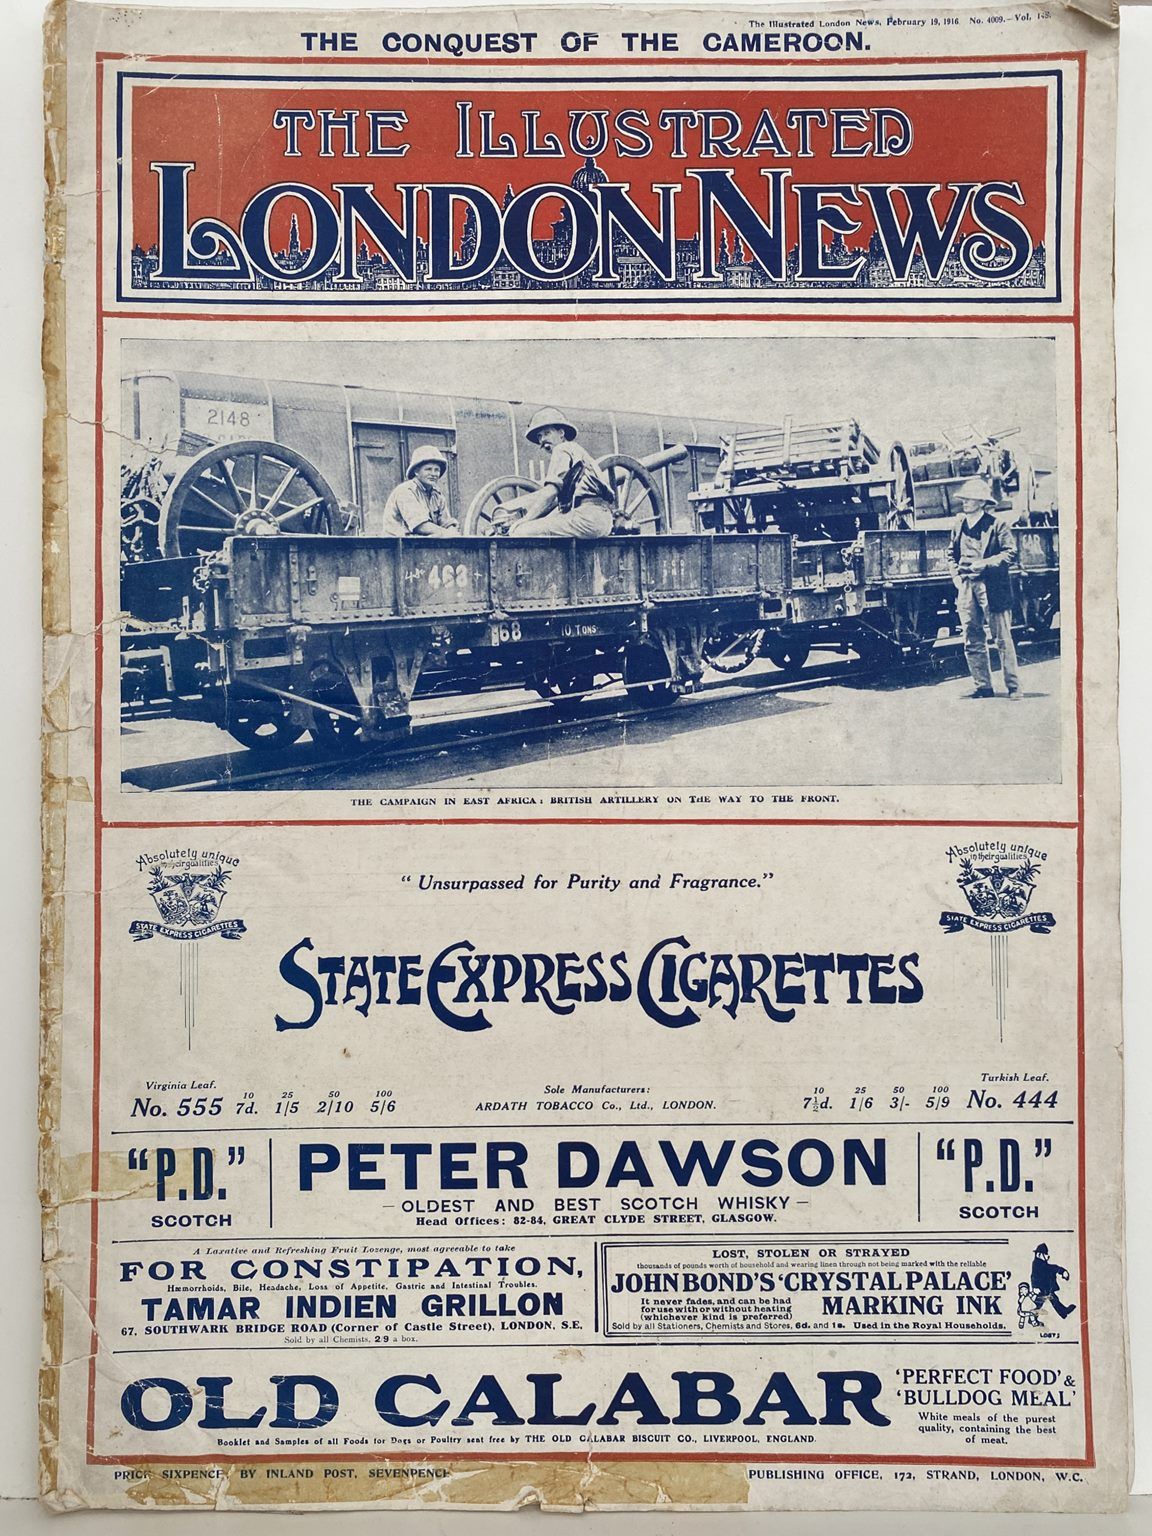 THE ILLUSTRATED LONDON NEWS The Conquest of The Cameroon. February 19, 1916, No 4009